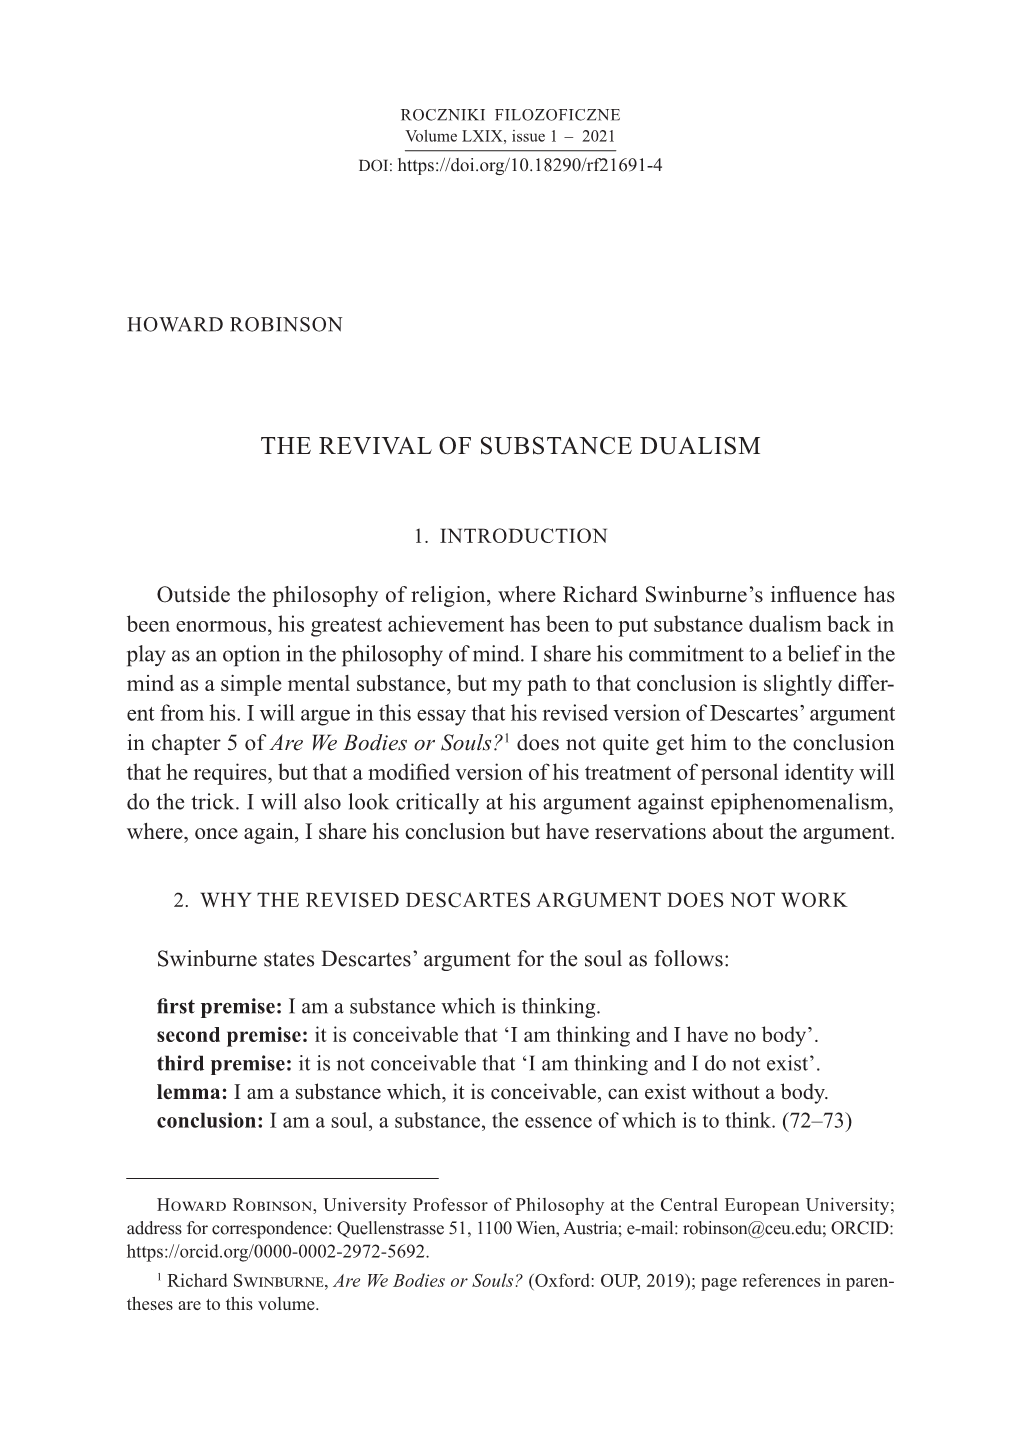 The Revival of Substance Dualism